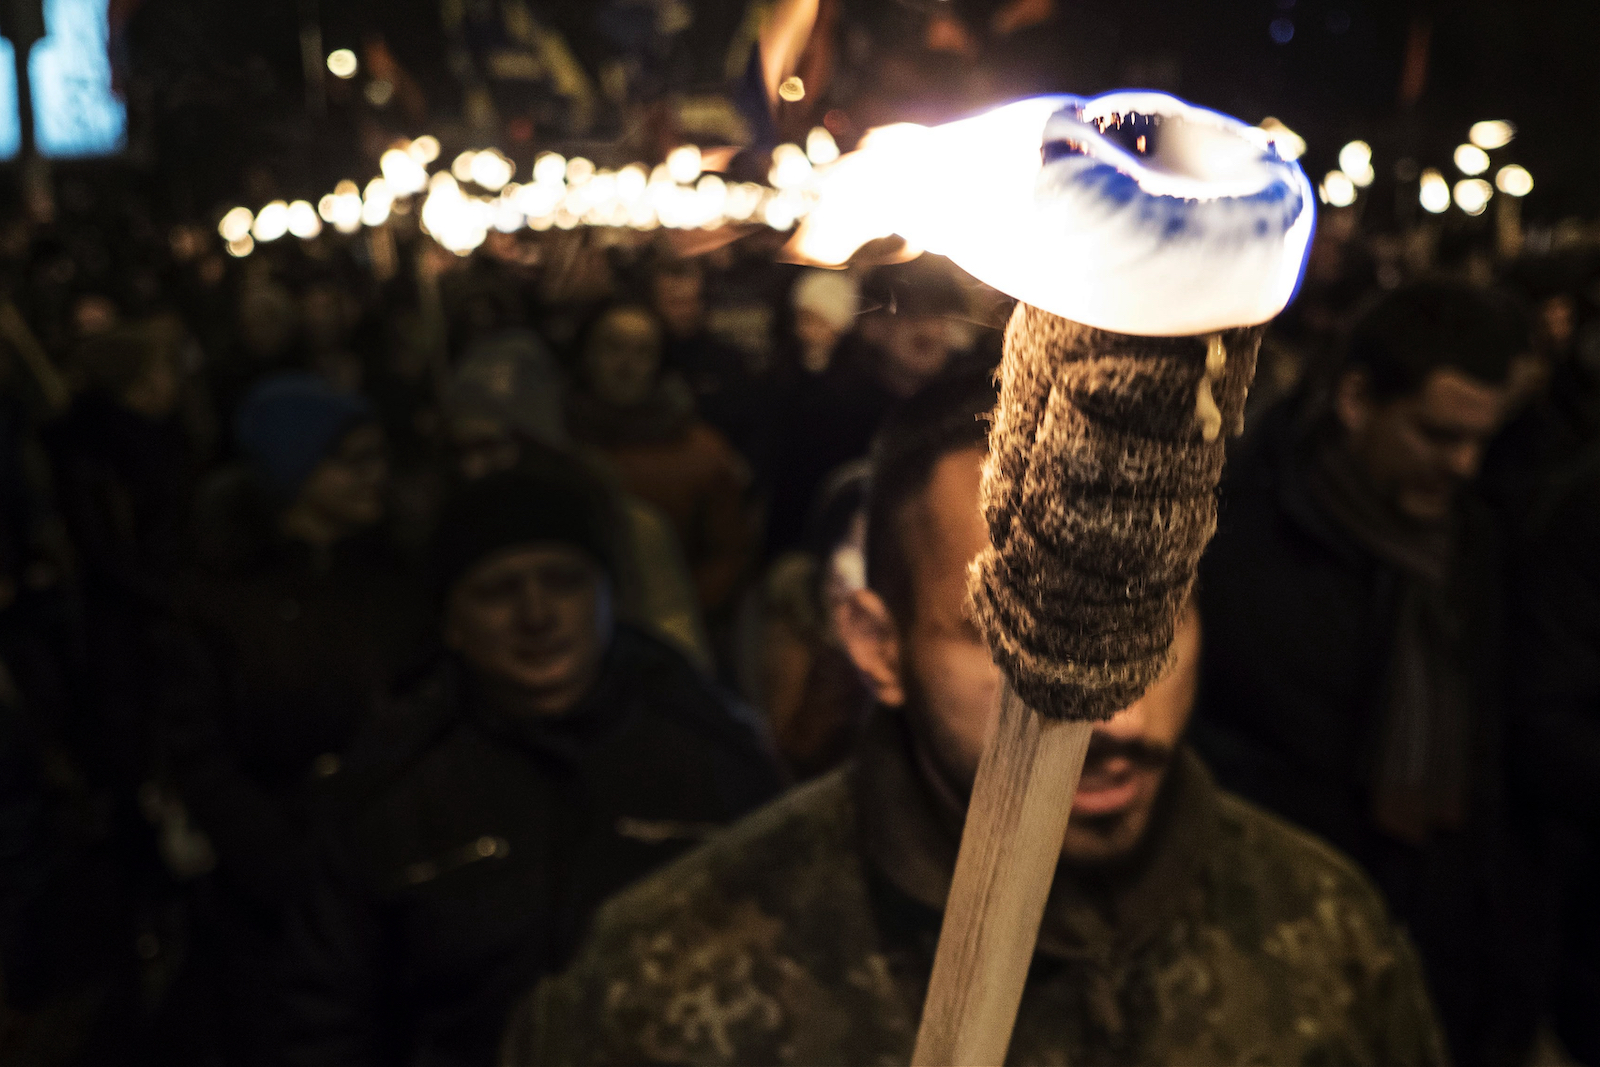 Torchlight procession in honor of the birthday of Stepan Bandera in Kyiv